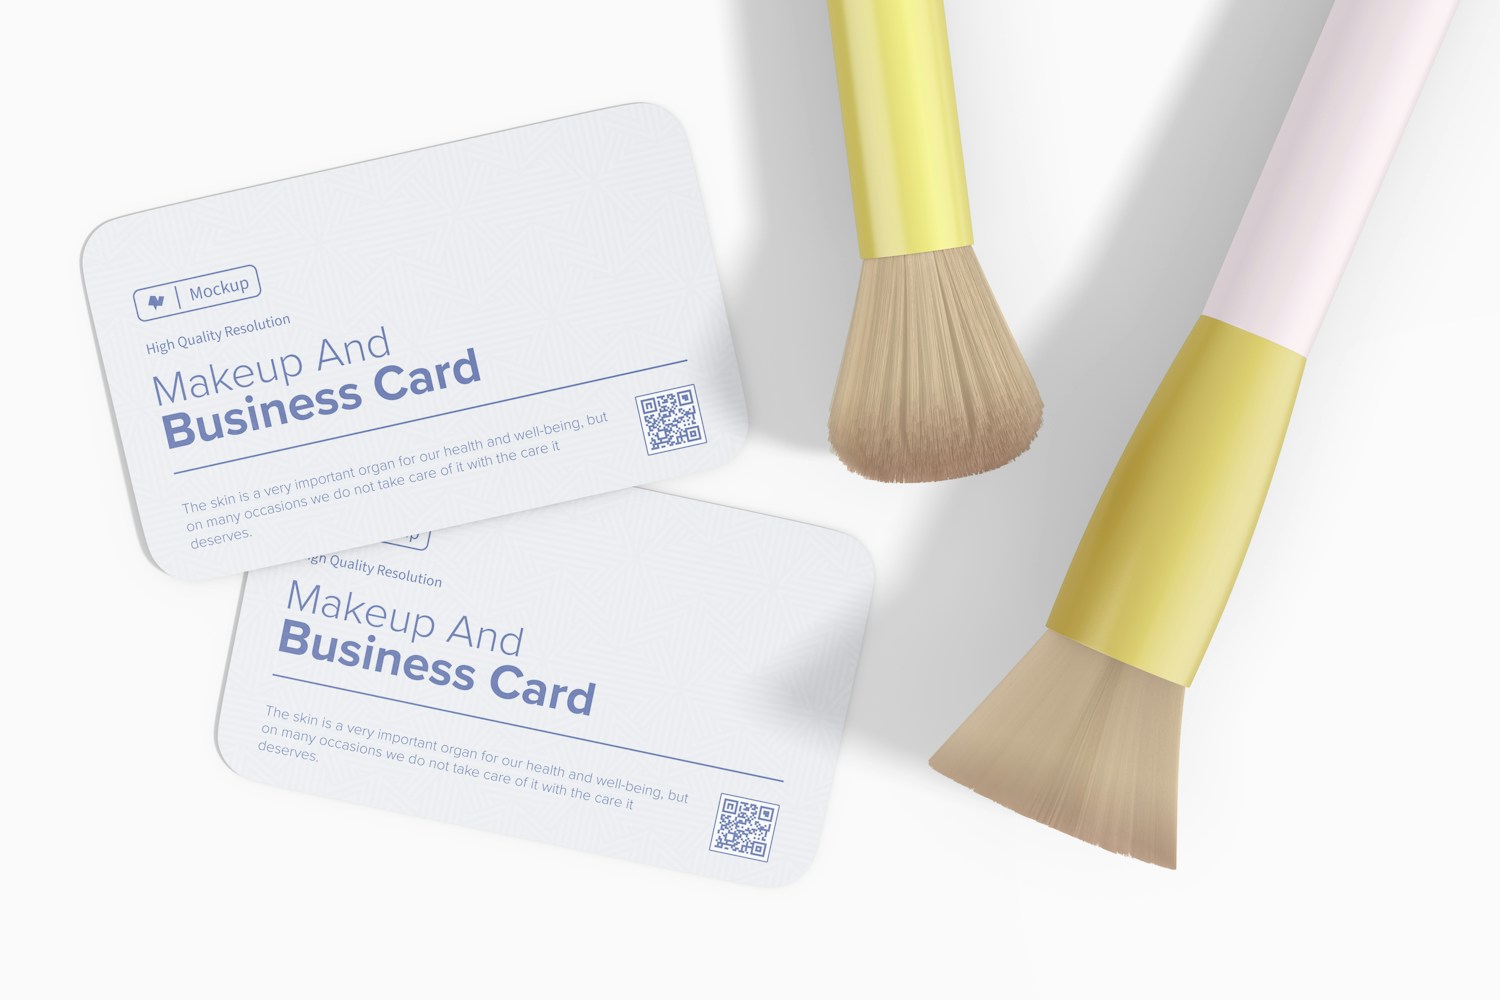 Makeup and Business Card Scene Mockup, Top View